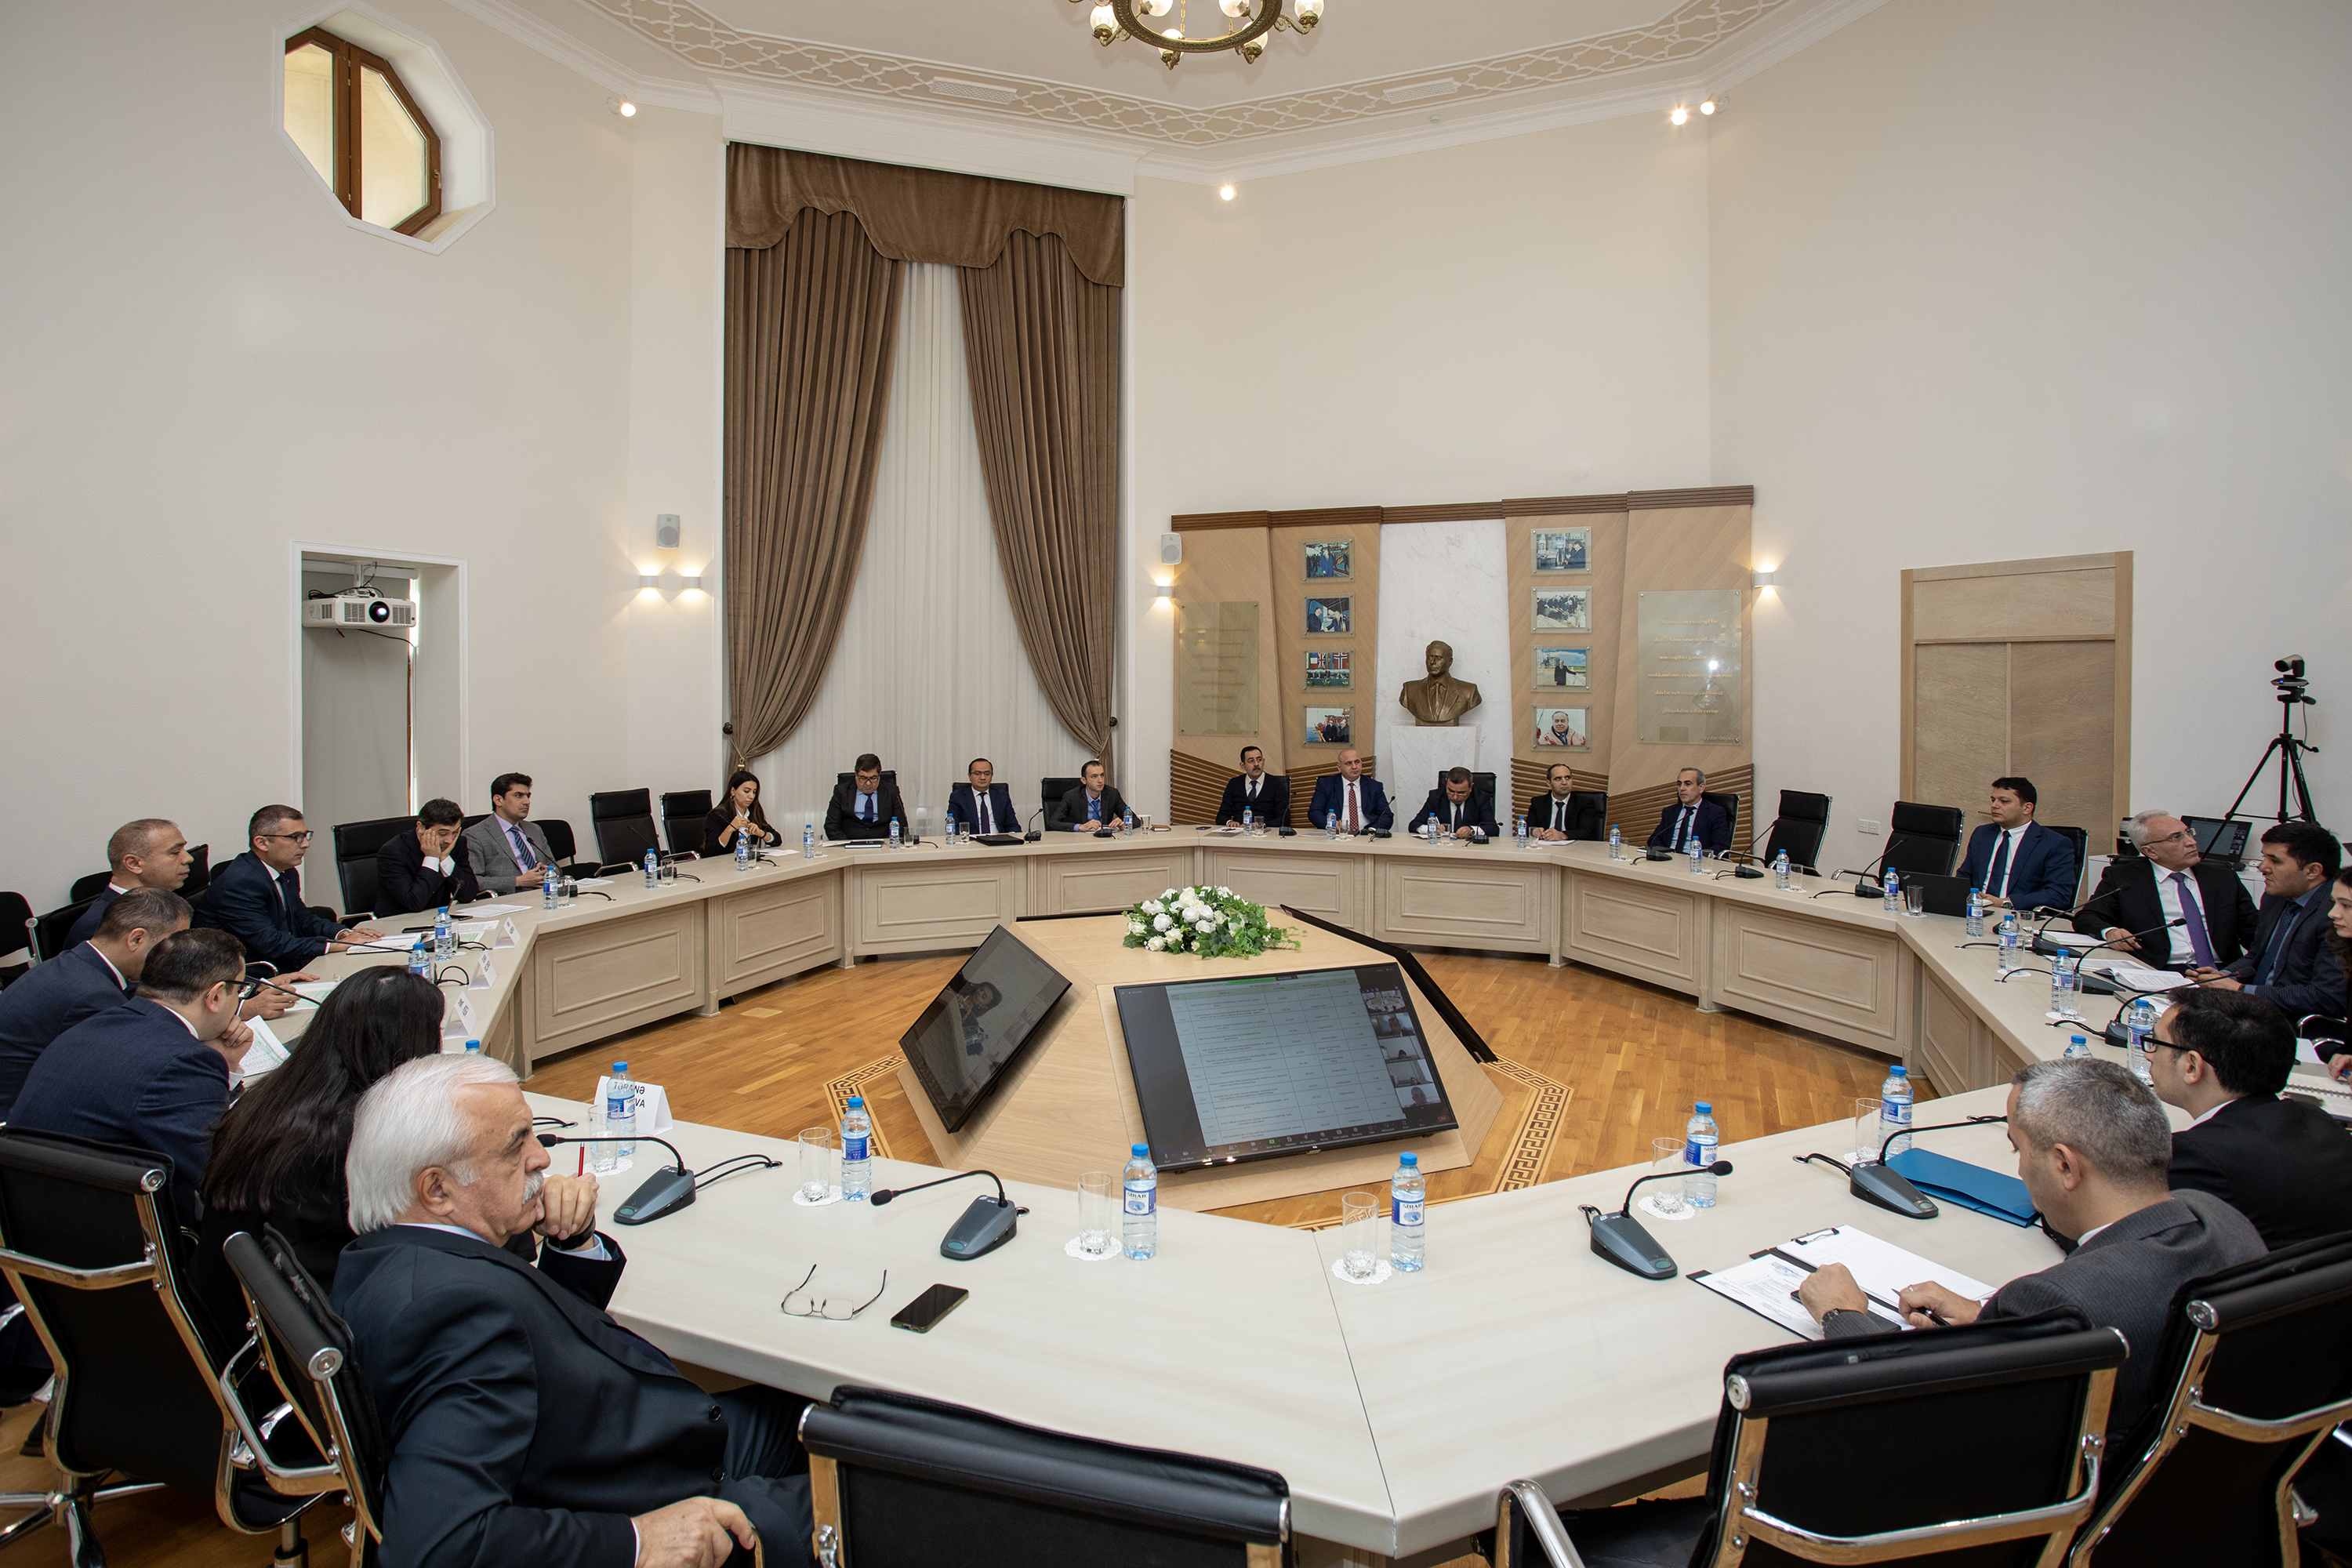 The next meeting of the Working Group on the green energy zone was held